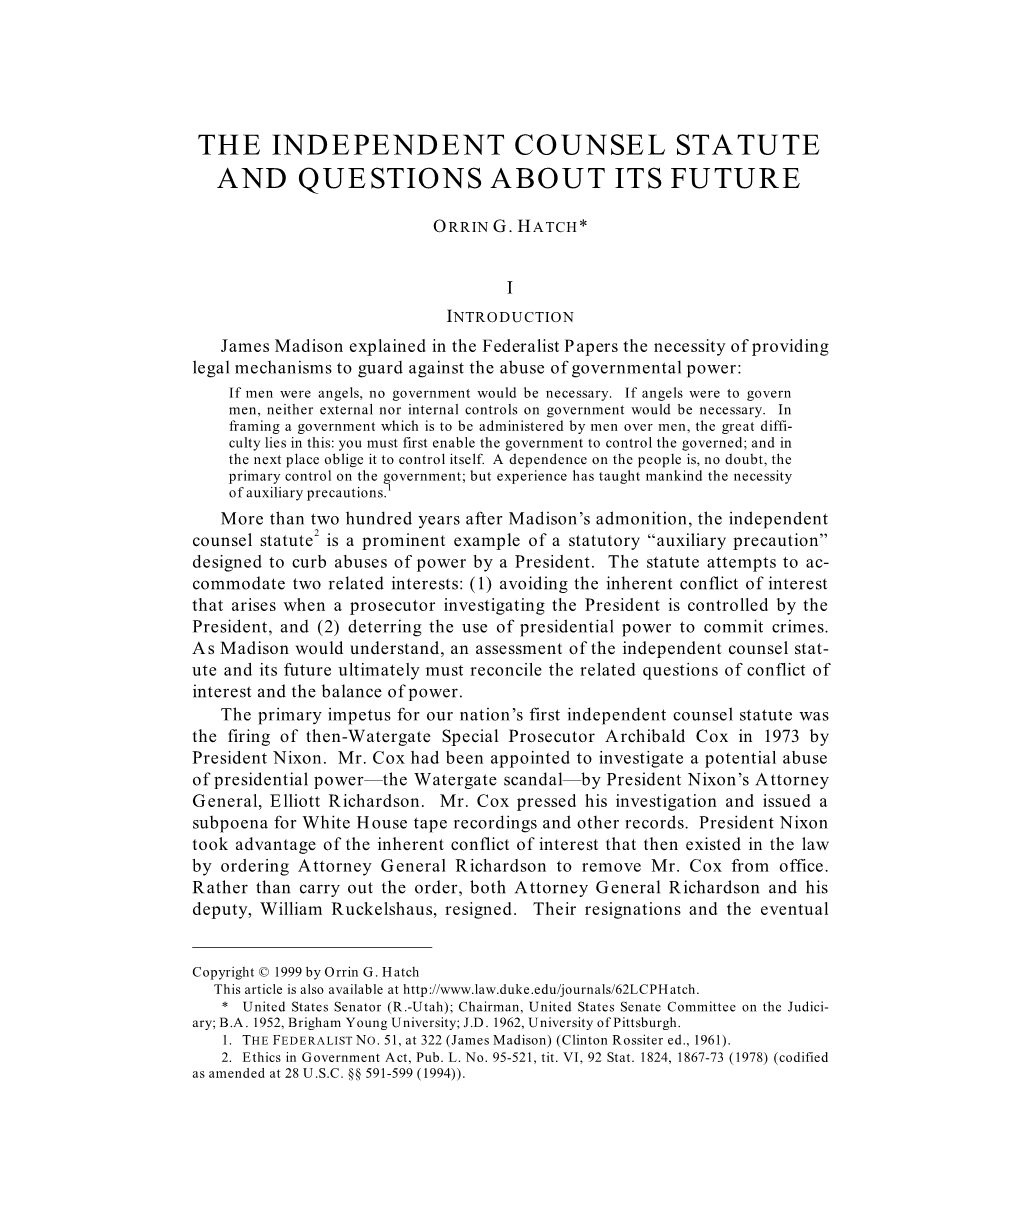 The Independent Counsel Statute and Questions About Its Future